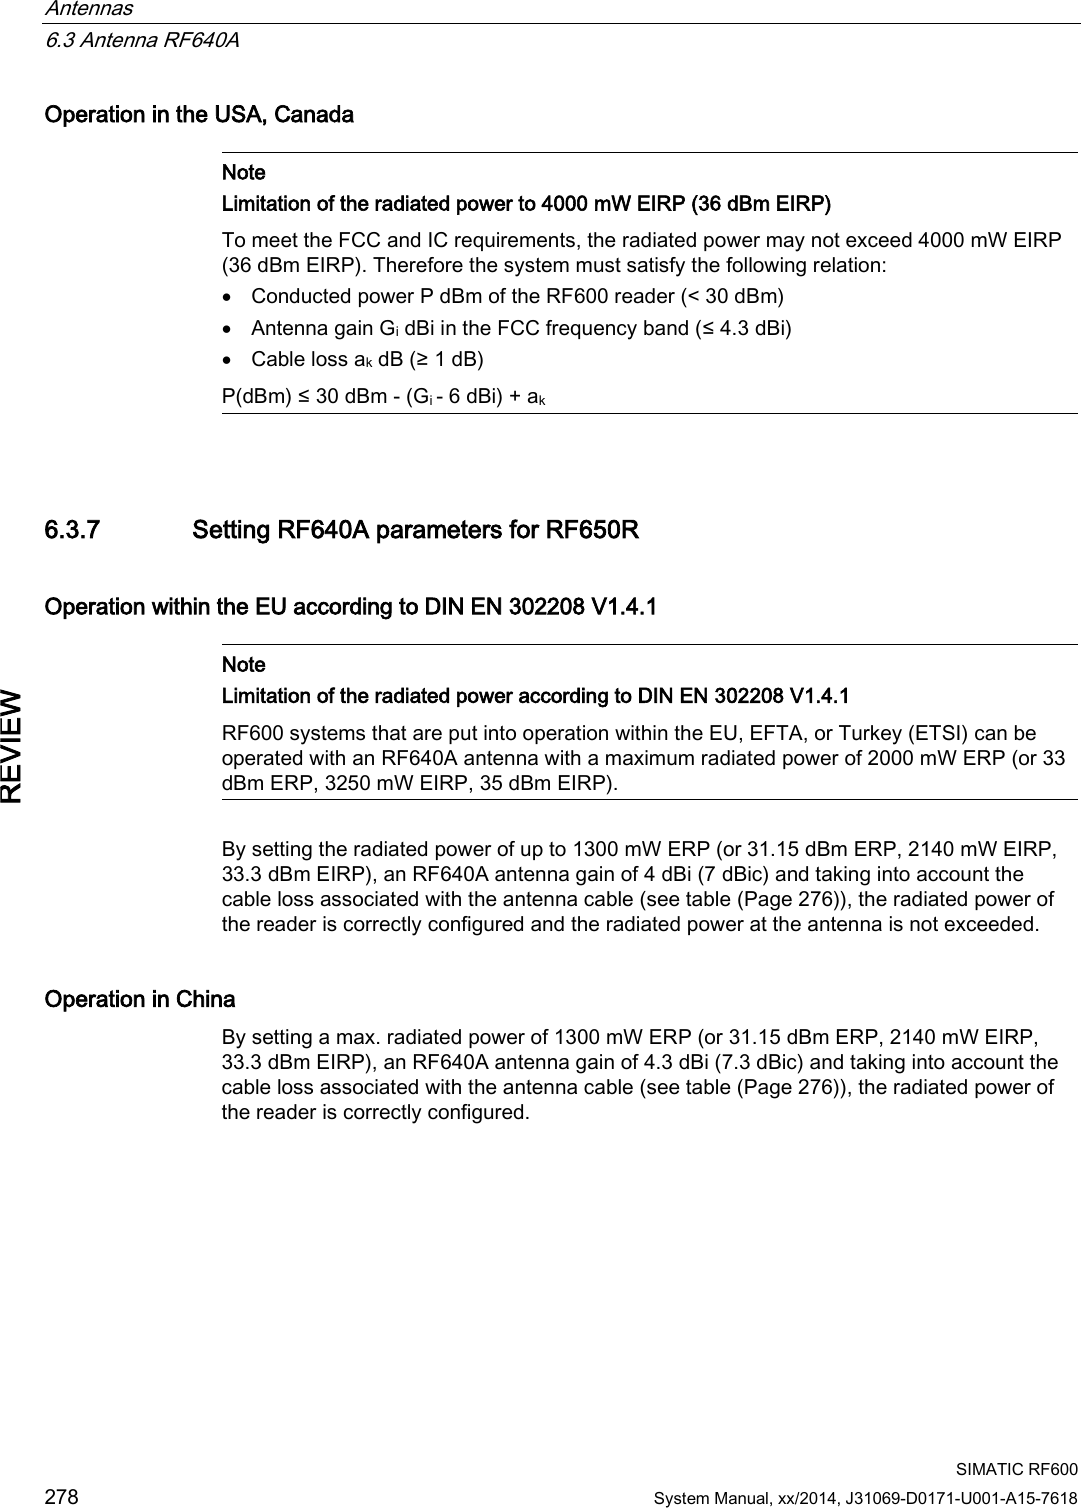 Antennas   6.3 Antenna RF640A  SIMATIC RF600 278 System Manual, xx/2014, J31069-D0171-U001-A15-7618 REVIEW Operation in the USA, Canada   Note Limitation of the radiated power to 4000 mW EIRP (36 dBm EIRP) To meet the FCC and IC requirements, the radiated power may not exceed 4000 mW EIRP (36 dBm EIRP). Therefore the system must satisfy the following relation: • Conducted power P dBm of the RF600 reader (&lt; 30 dBm) • Antenna gain Gi dBi in the FCC frequency band (≤ 4.3 dBi) • Cable loss ak dB (≥ 1 dB) P(dBm) ≤ 30 dBm - (Gi - 6 dBi) + ak  6.3.7 Setting RF640A parameters for RF650R Operation within the EU according to DIN EN 302208 V1.4.1   Note Limitation of the radiated power according to DIN EN 302208 V1.4.1 RF600 systems that are put into operation within the EU, EFTA, or Turkey (ETSI) can be operated with an RF640A antenna with a maximum radiated power of 2000 mW ERP (or 33 dBm ERP, 3250 mW EIRP, 35 dBm EIRP).  By setting the radiated power of up to 1300 mW ERP (or 31.15 dBm ERP, 2140 mW EIRP, 33.3 dBm EIRP), an RF640A antenna gain of 4 dBi (7 dBic) and taking into account the cable loss associated with the antenna cable (see table (Page 276)), the radiated power of the reader is correctly configured and the radiated power at the antenna is not exceeded. Operation in China By setting a max. radiated power of 1300 mW ERP (or 31.15 dBm ERP, 2140 mW EIRP, 33.3 dBm EIRP), an RF640A antenna gain of 4.3 dBi (7.3 dBic) and taking into account the cable loss associated with the antenna cable (see table (Page 276)), the radiated power of the reader is correctly configured. 